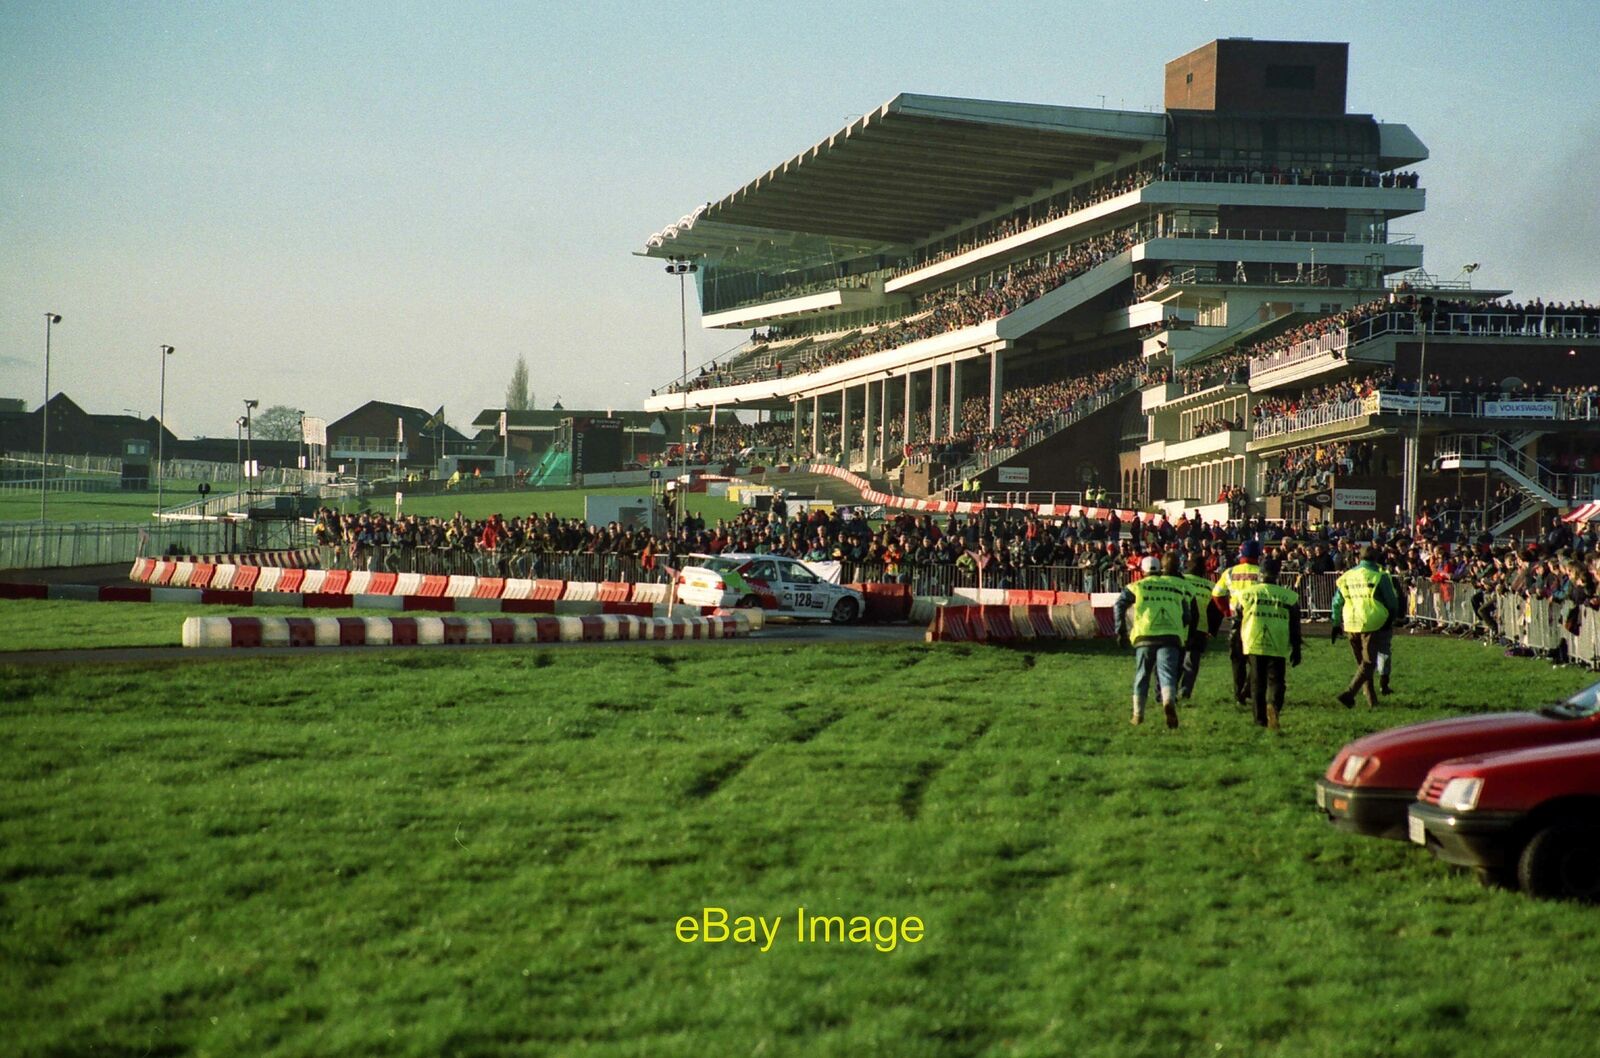 Photo 12x8 The Main Grandstand at Cheltenham Racecourse Taken at the 1998  c1998